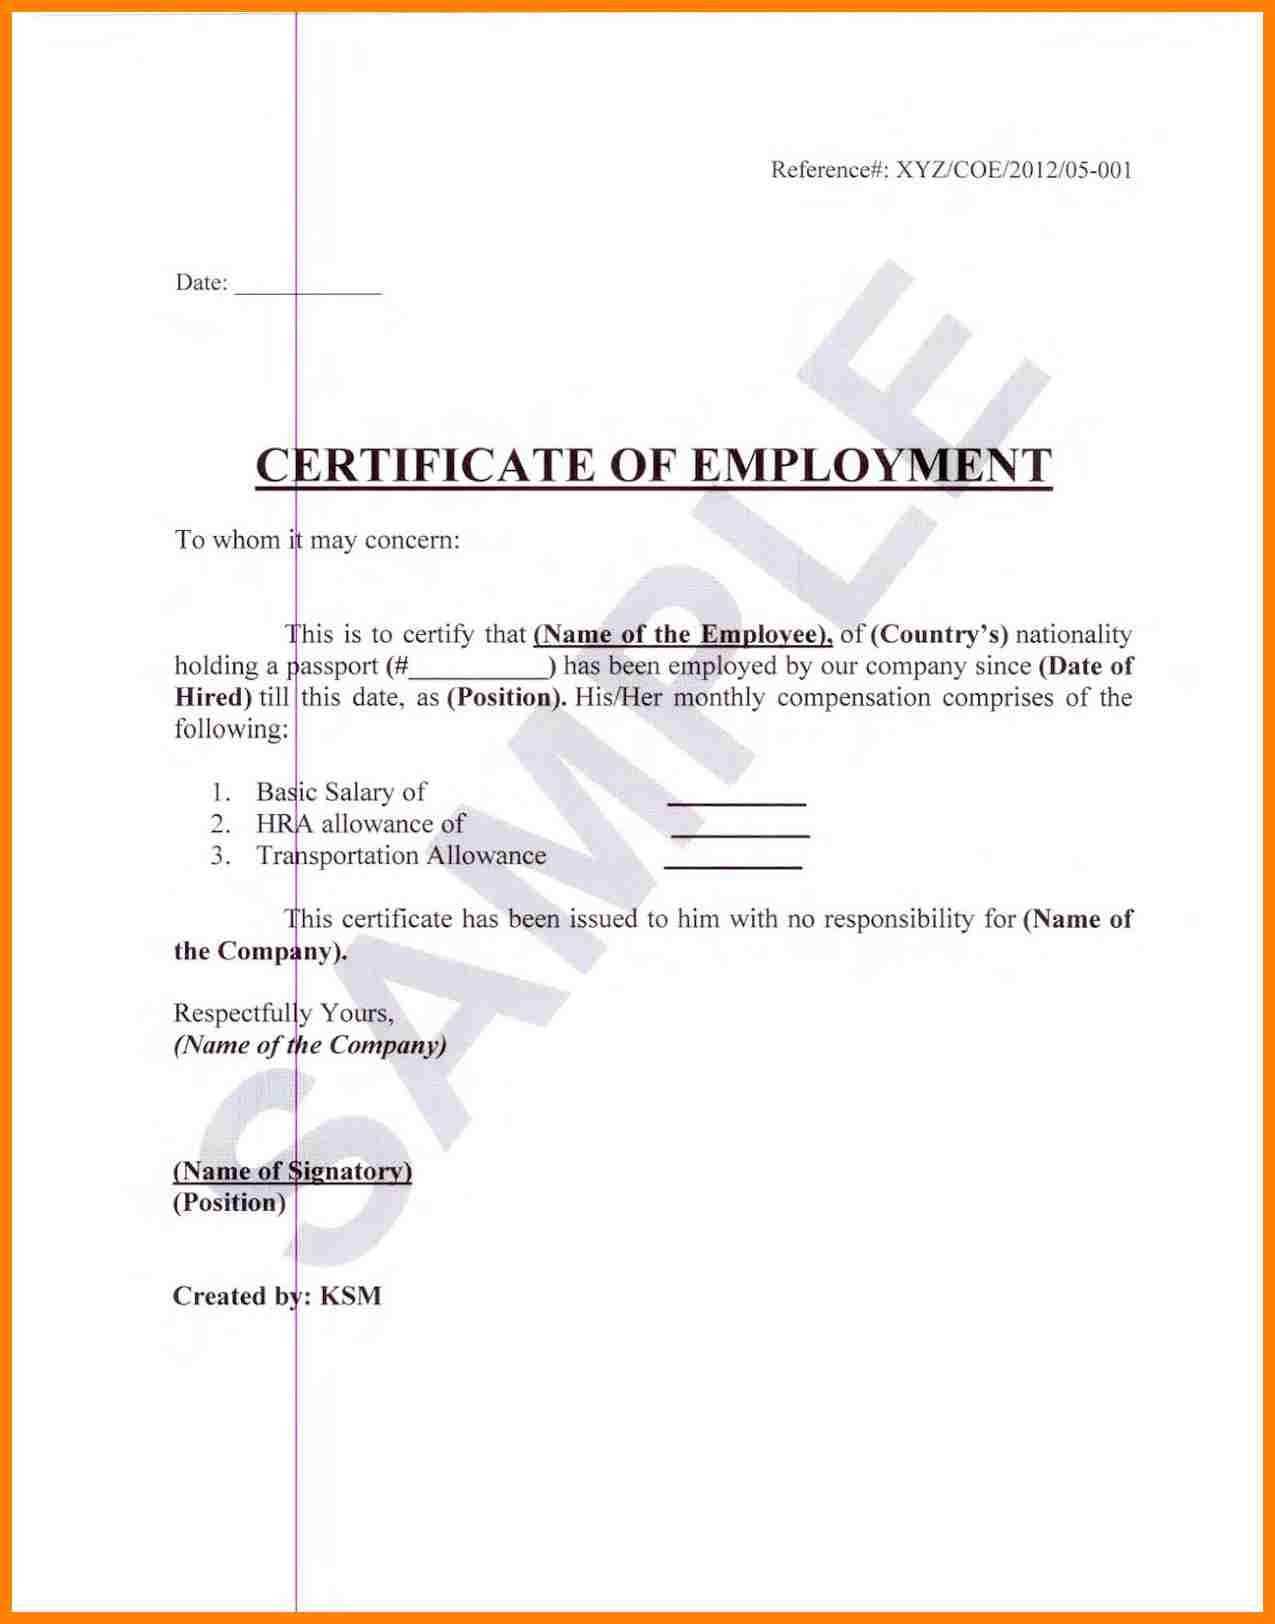 Sample Certification Employment Certificate Tugon Med Clinic With Template Of Certificate Of Employment